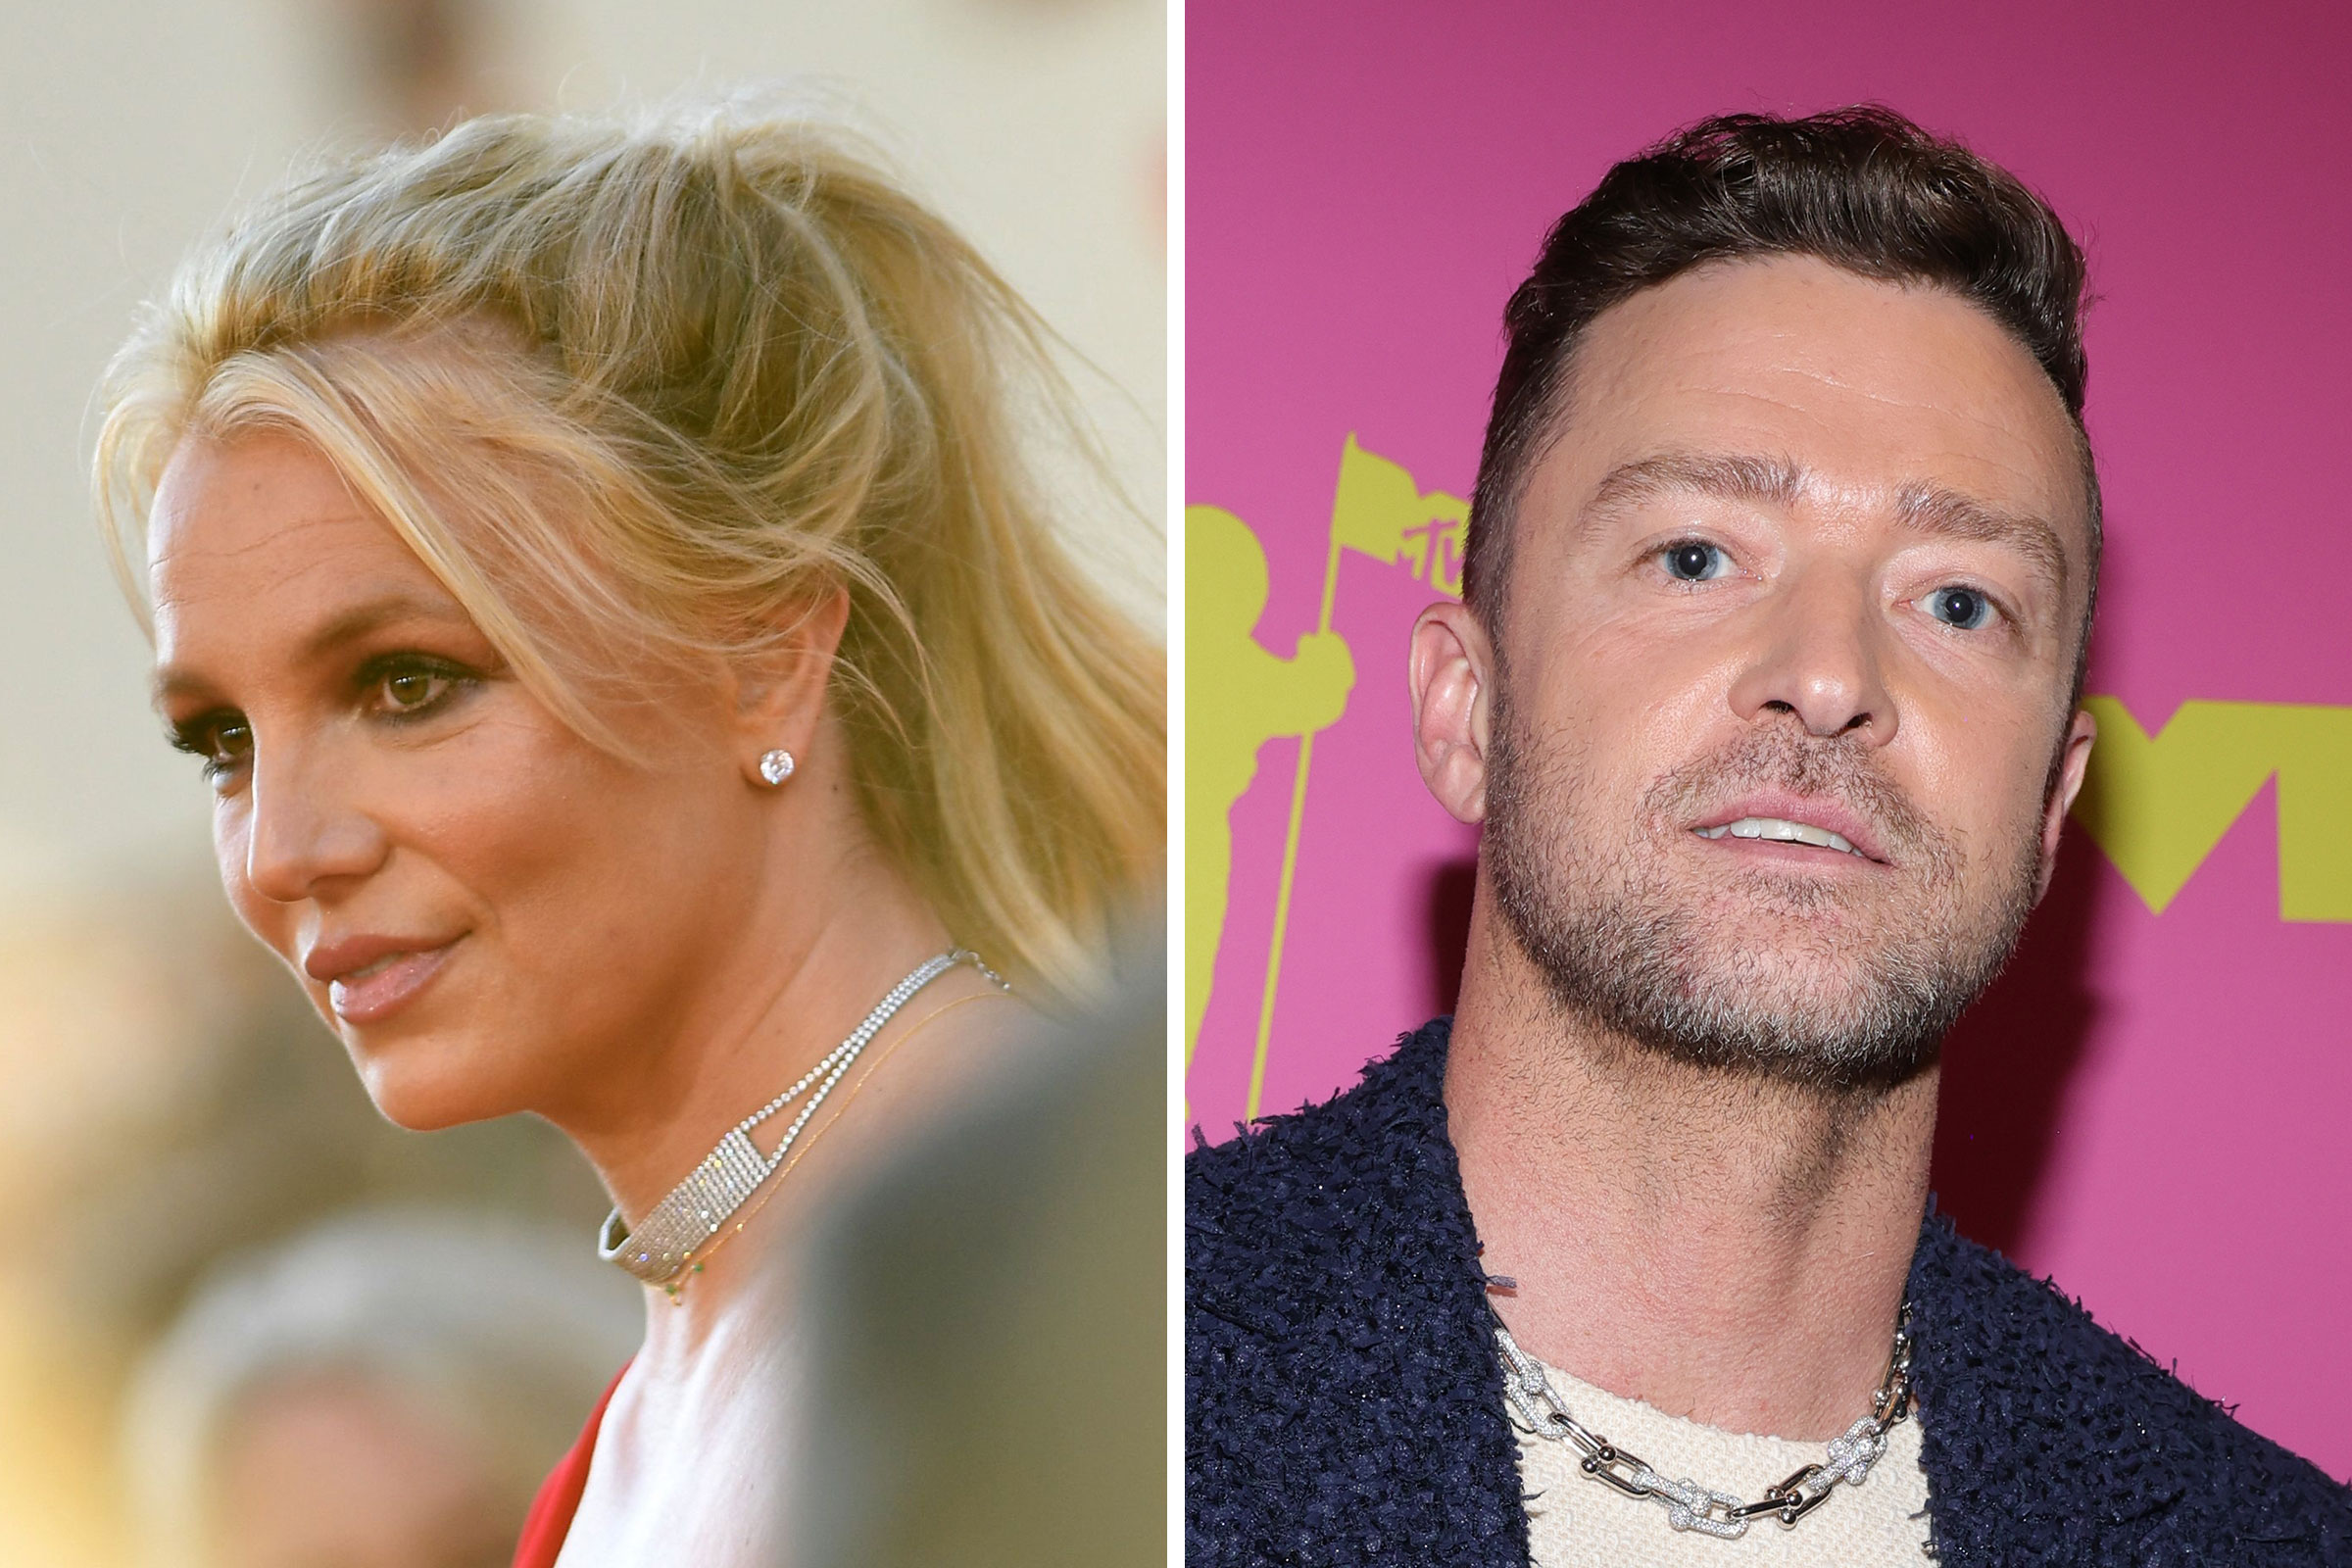 Britney Spears Fans Boosted a 13-Year-Old Song to No. 1 on the iTunes Chart to Beat Justin Timberlake